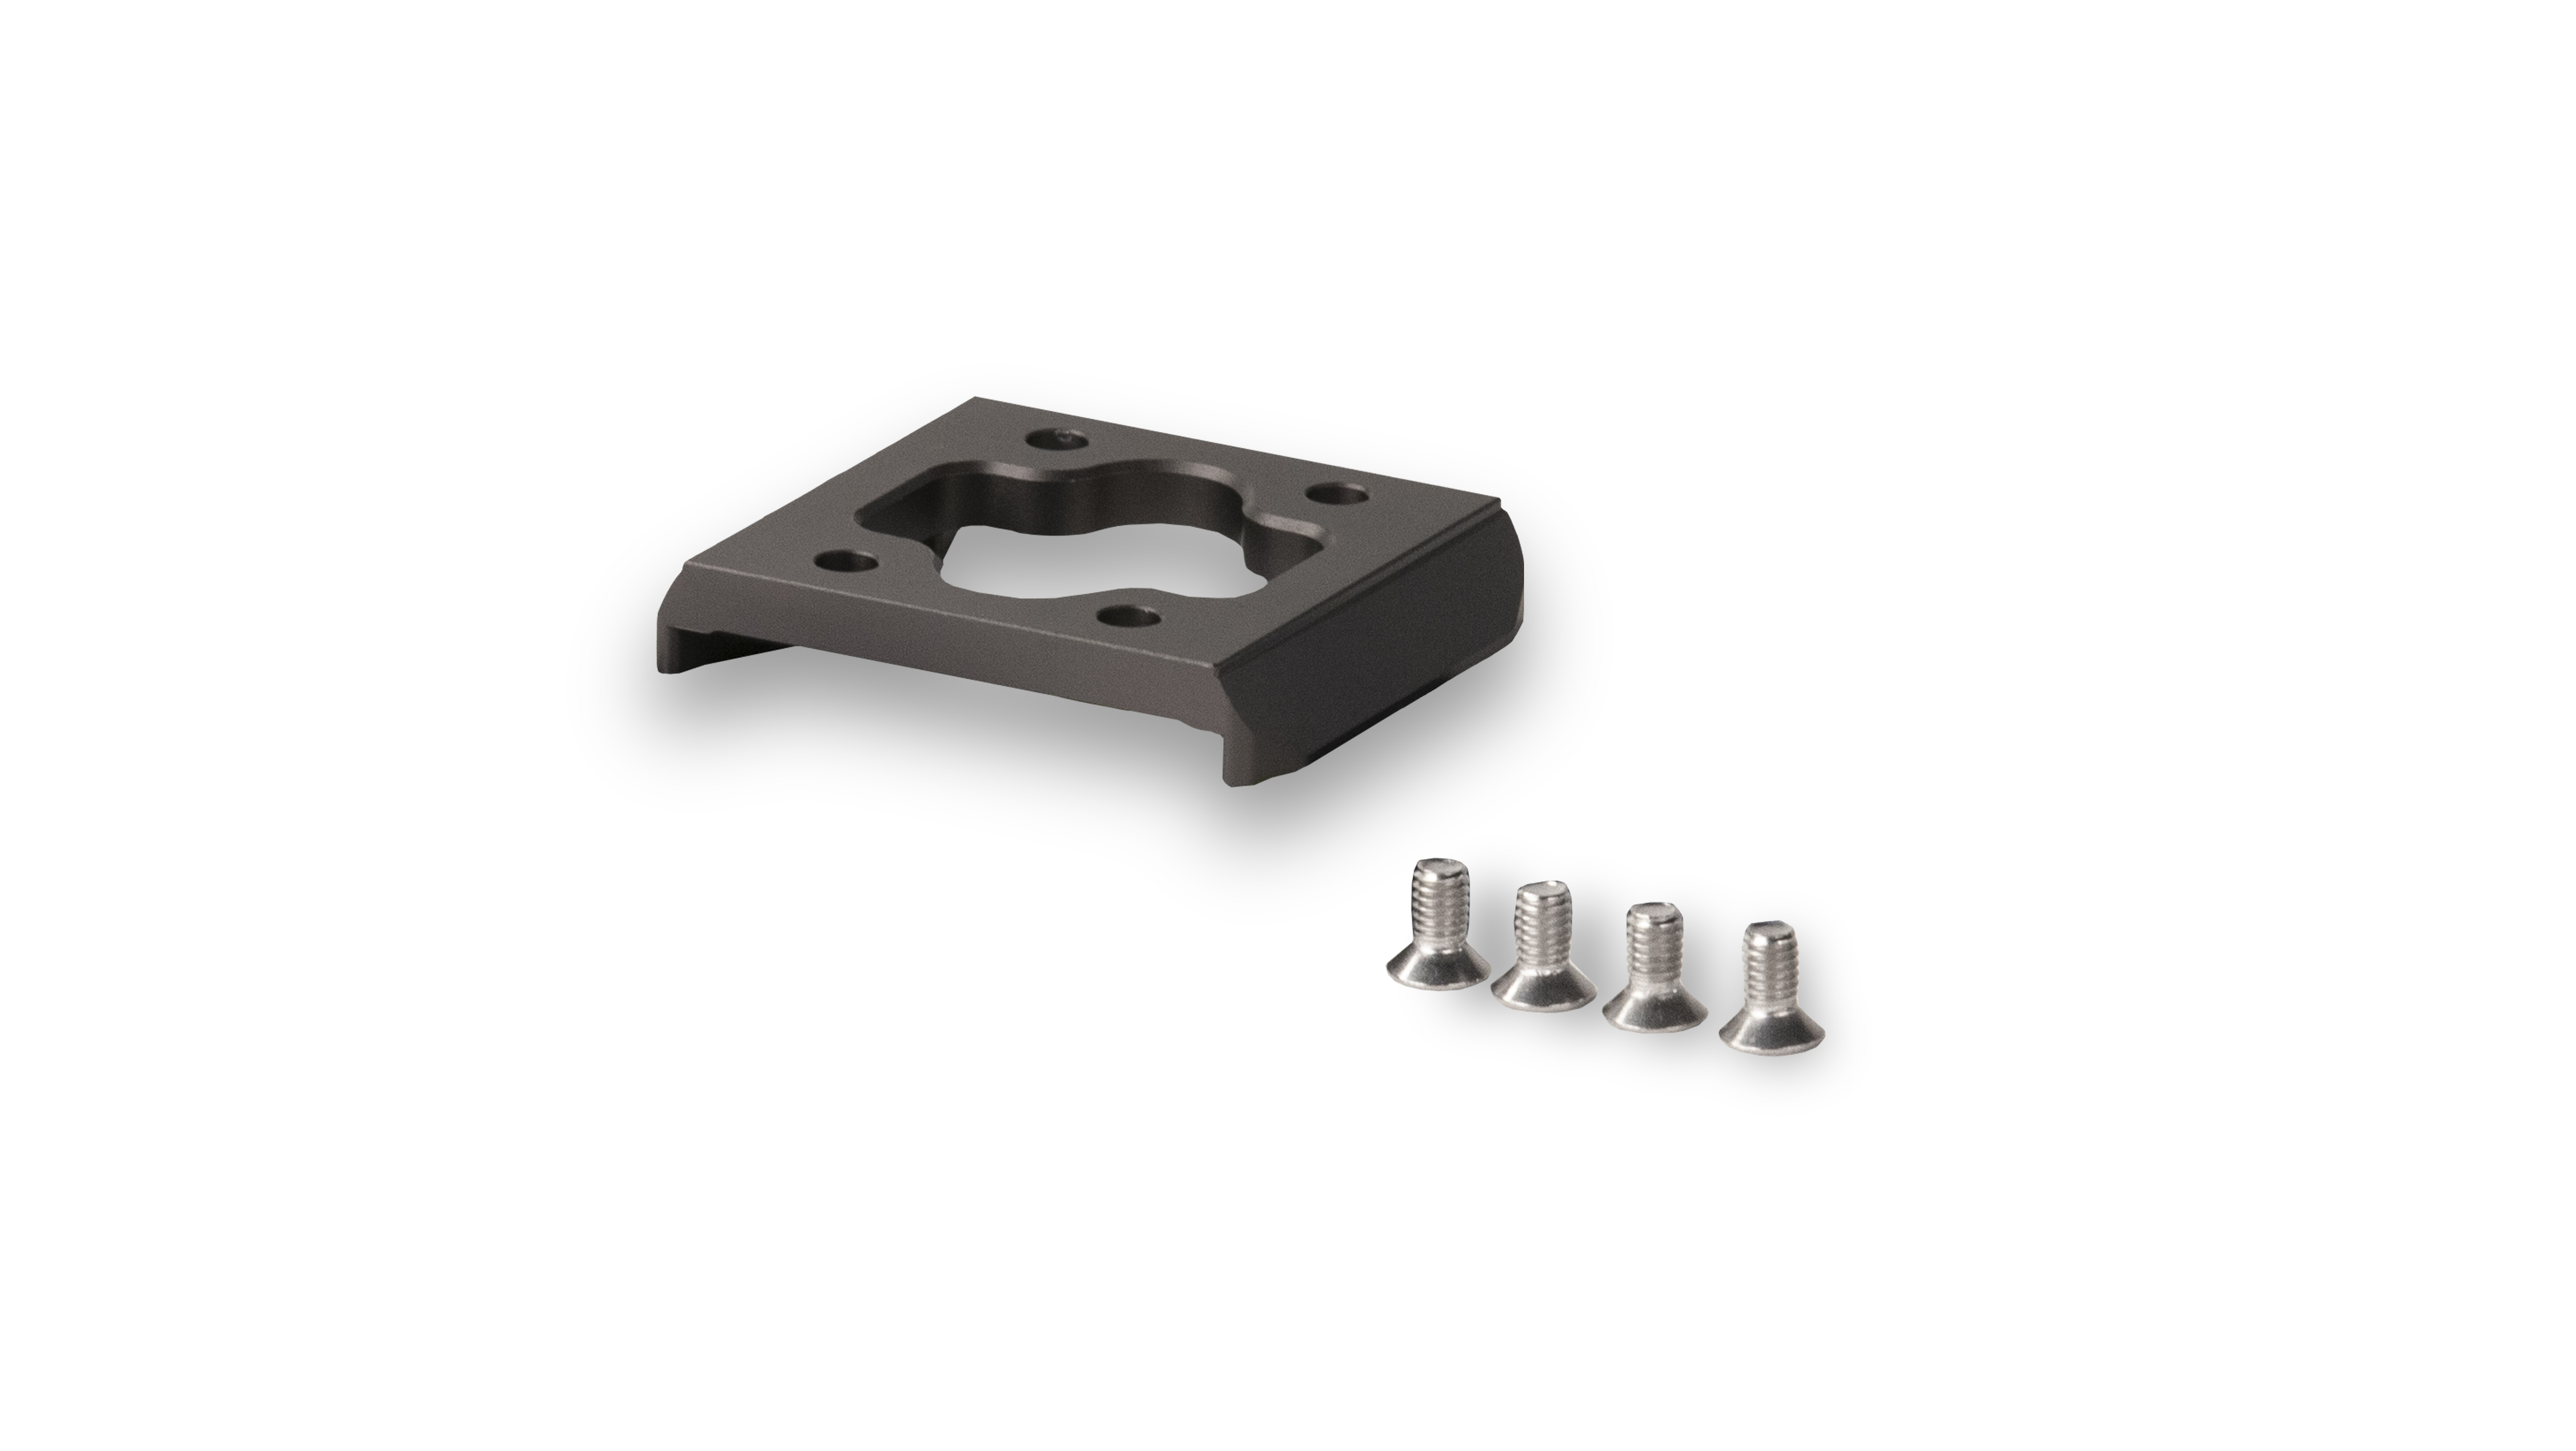 Tiltaing Manfrotto Quick Release Plate